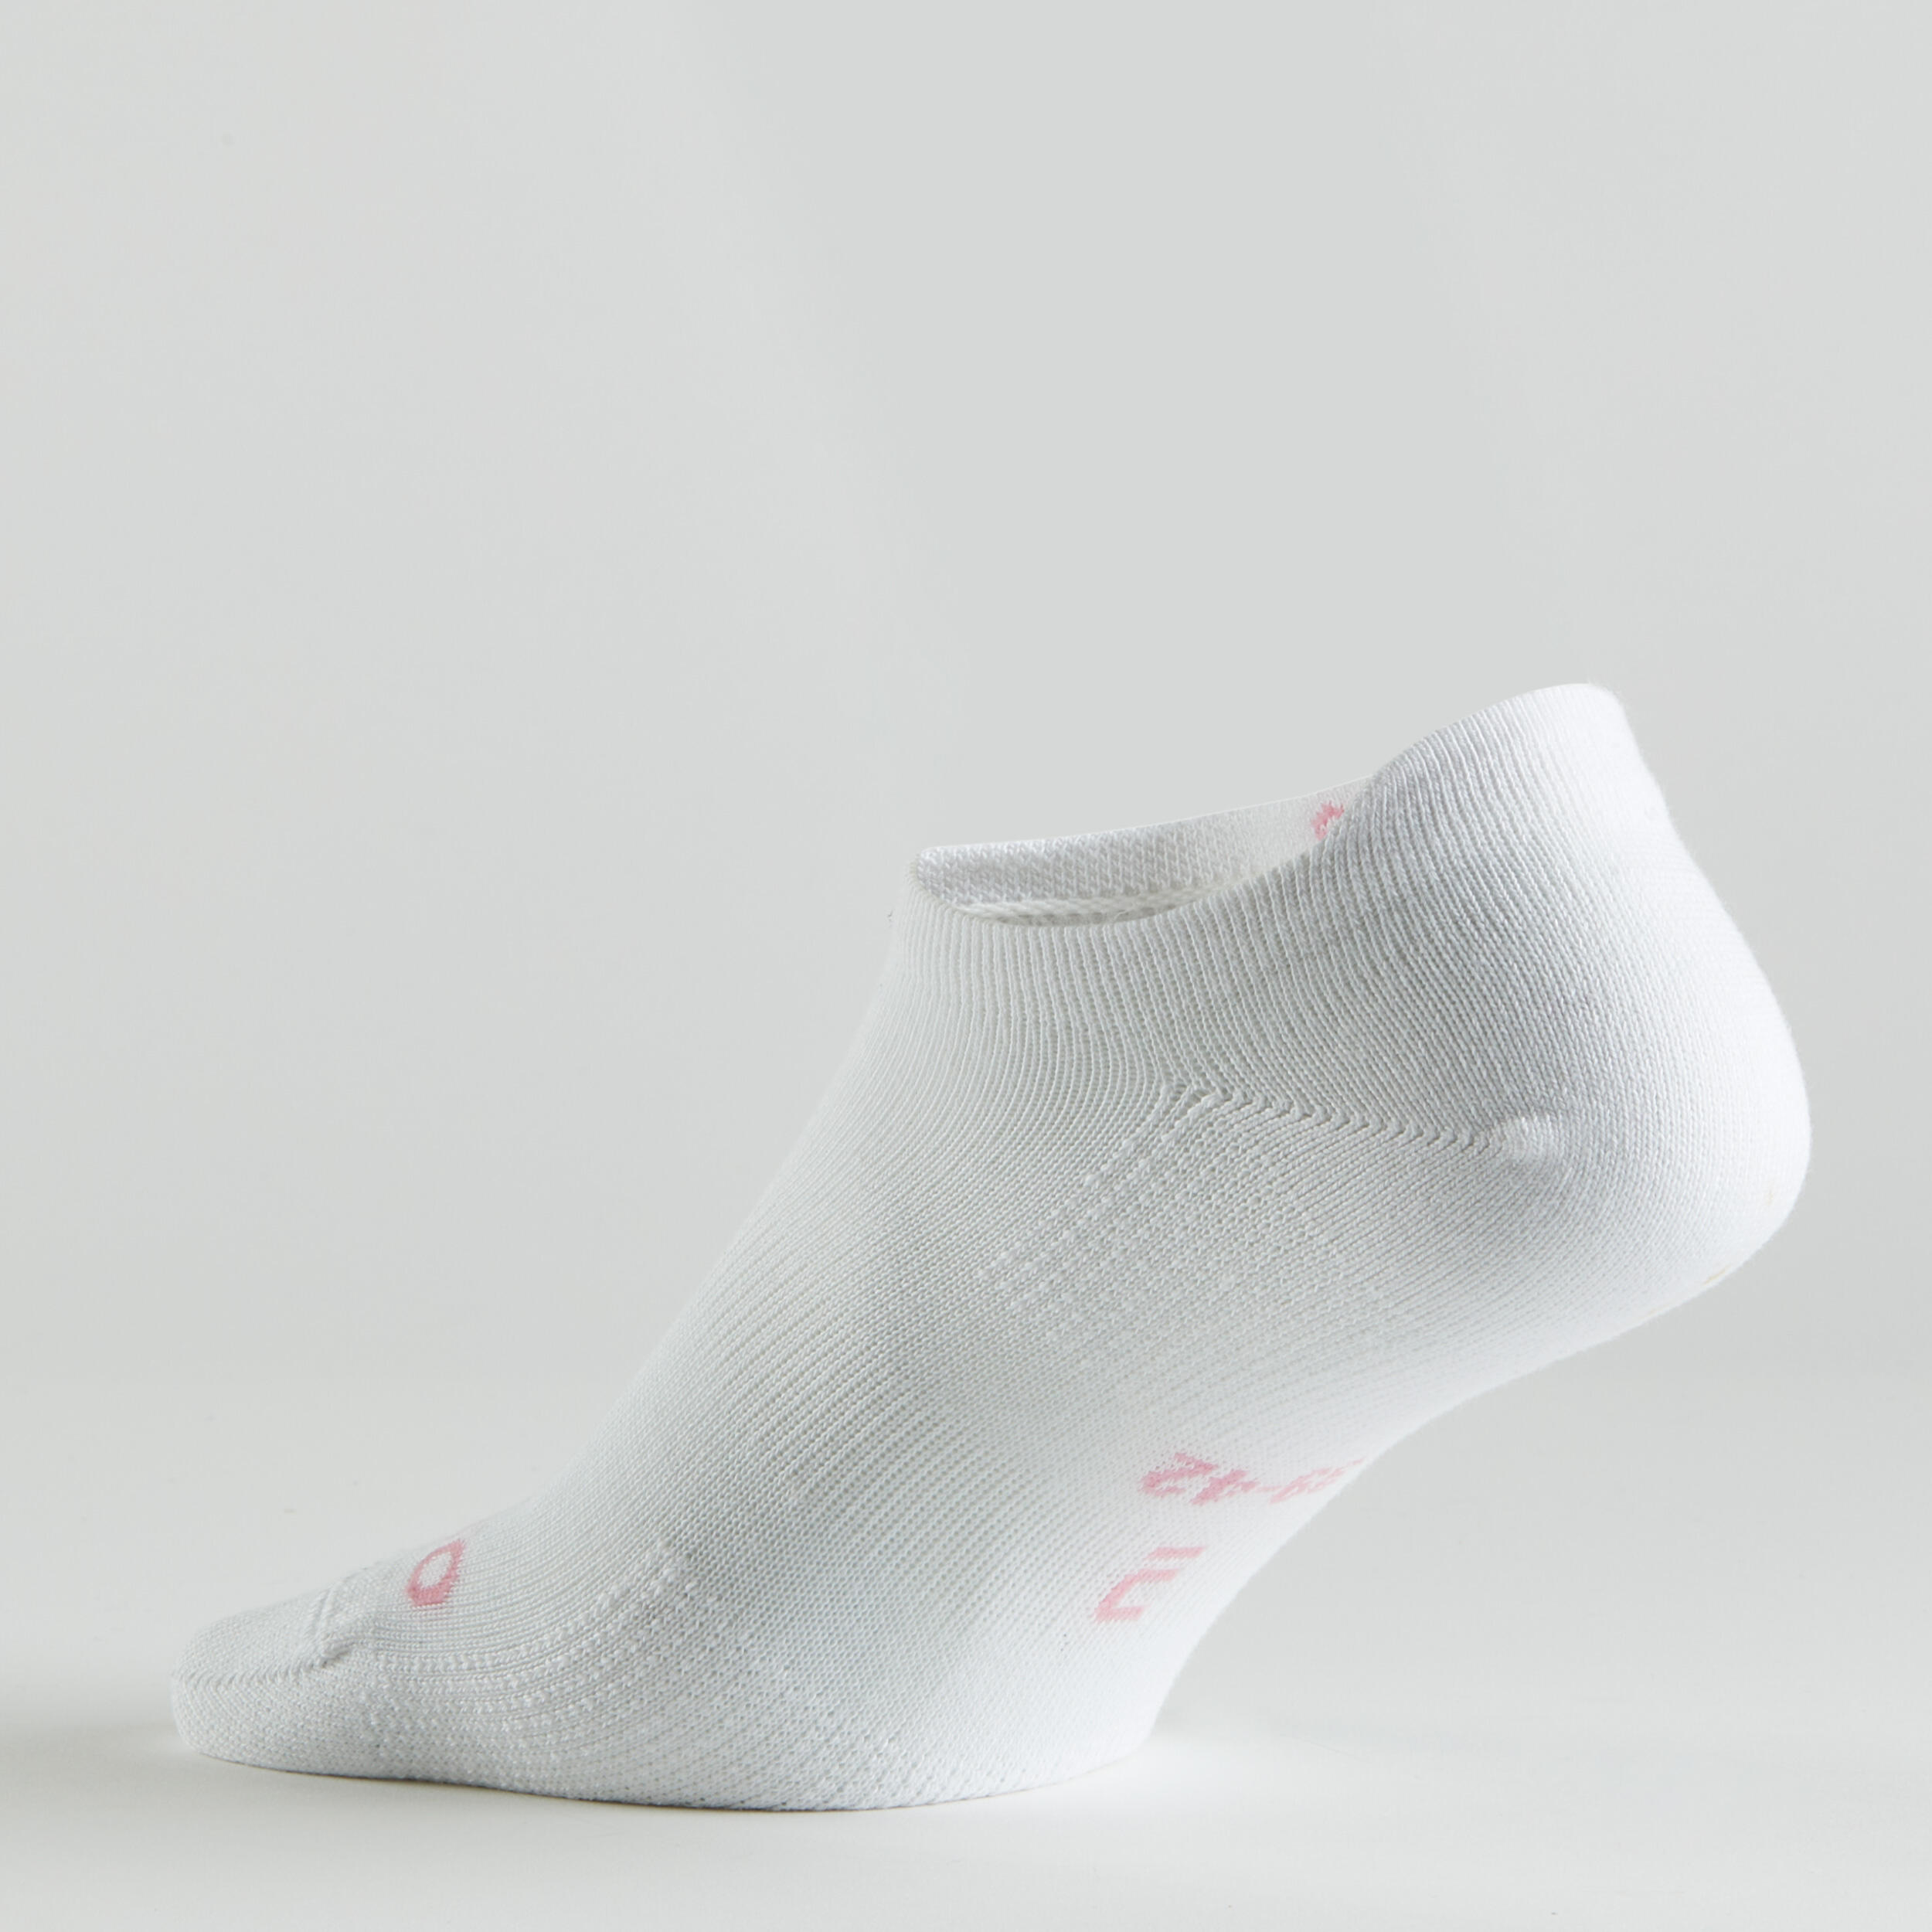 Low Sports Socks RS 160 Tri-Pack - Pink/White/China Blue 12/14